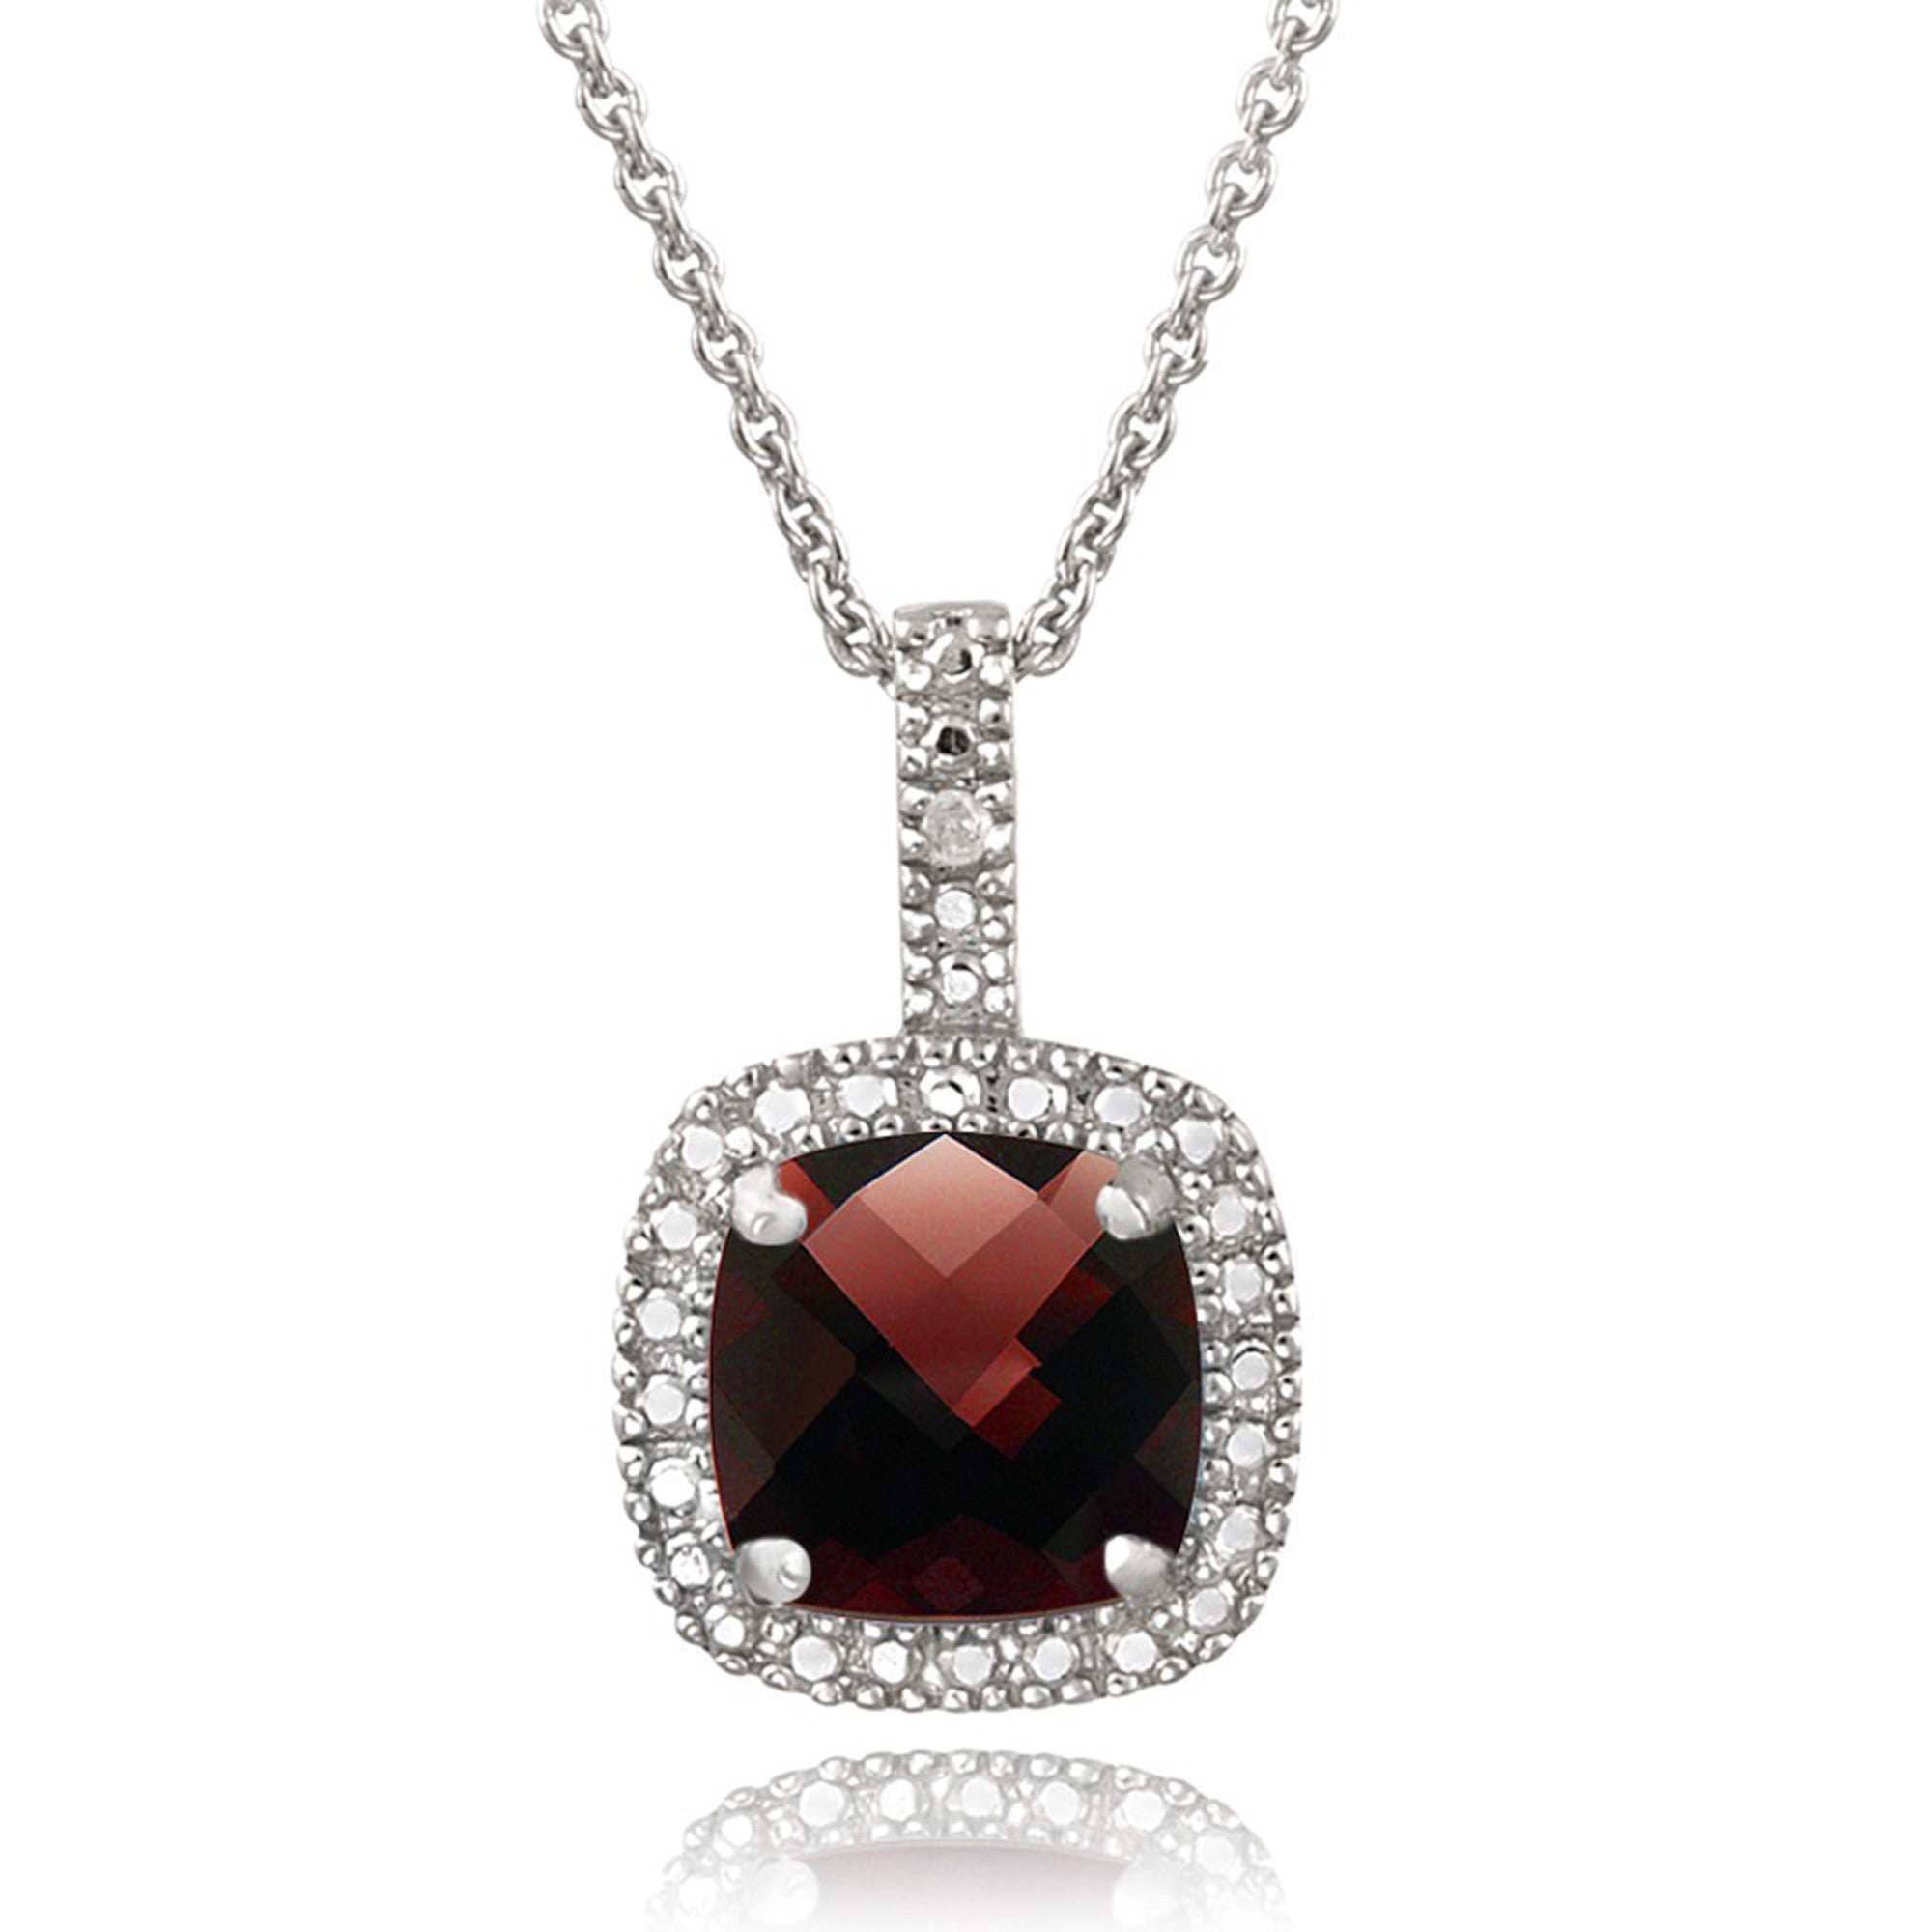 Square Necklace With Gemstone & Diamond Accents in Sterling Silver - Garnet